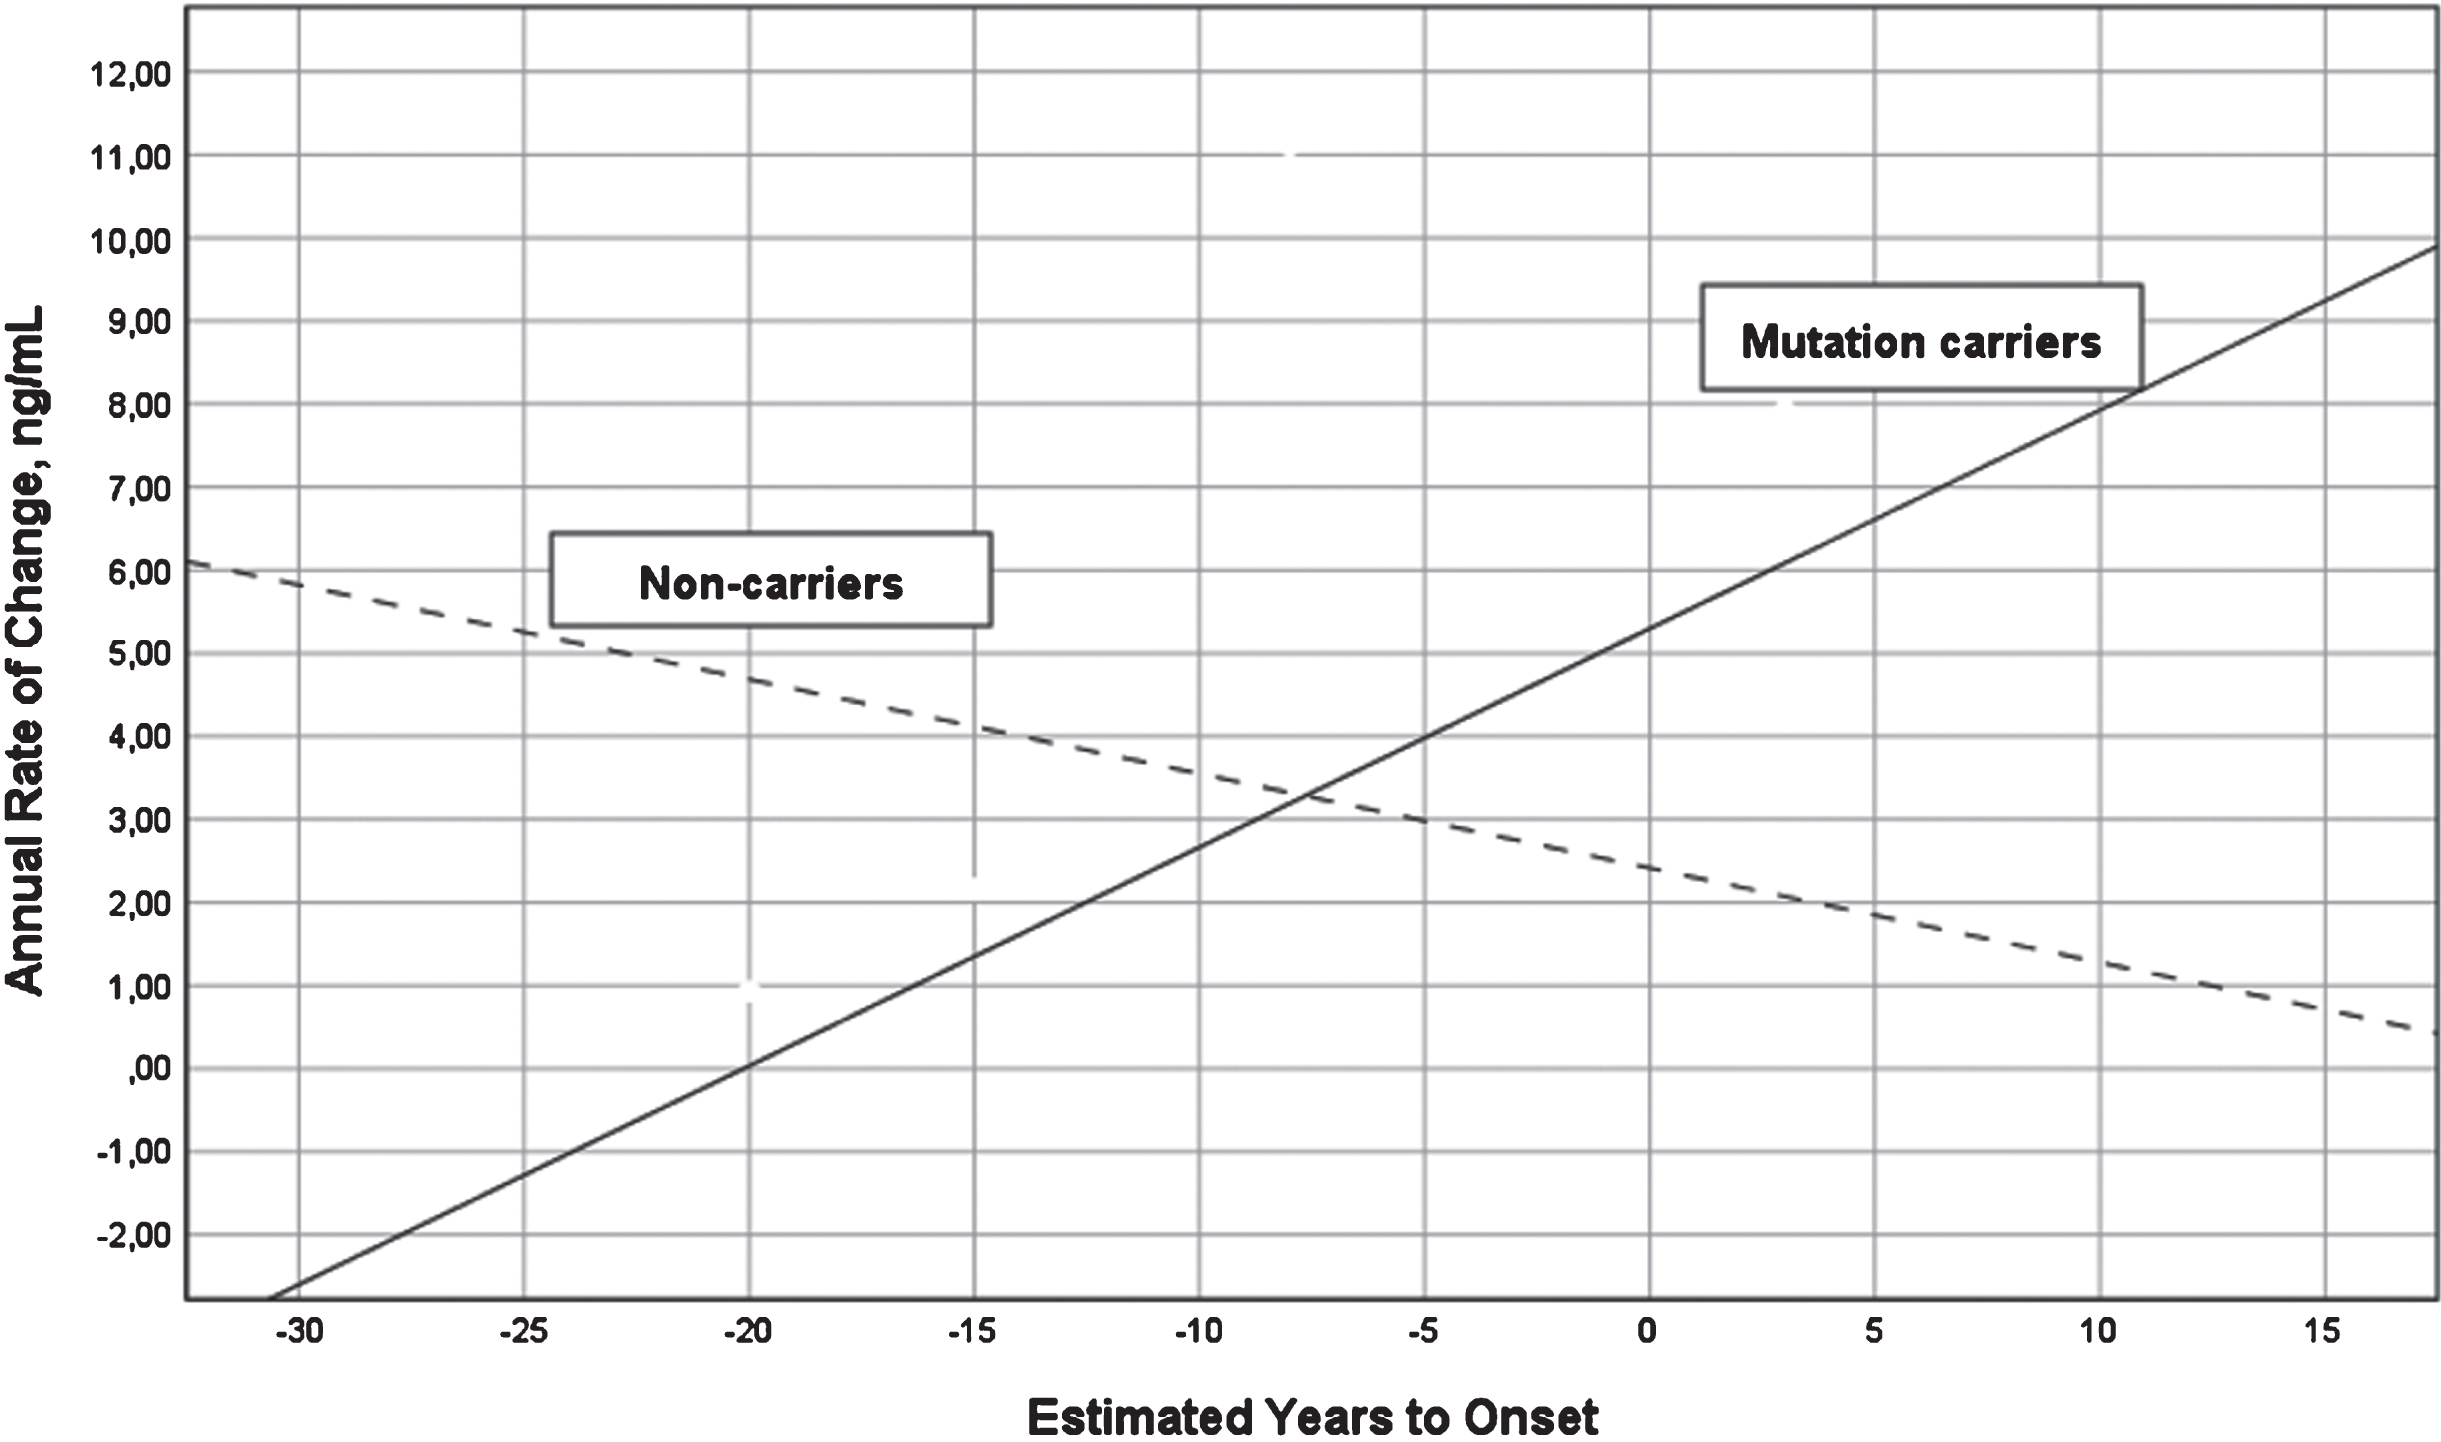 Annual change in YKL-40 levels versus expected years to onset in FAD MC and NC. Annual change in the levels of CSF YKL-40 in FAD MC (solid line) and NC (dashed line) in reference to expected years to symptom onset. The mean annual change in CSF YKL-40 differed significantly between the MC and NC (F = 13.18, p = 0.005). CSF, cerebrospinal fluid; FAD, familial Alzheimer’s disease; MC, mutation carriers; NC, non-carriers.